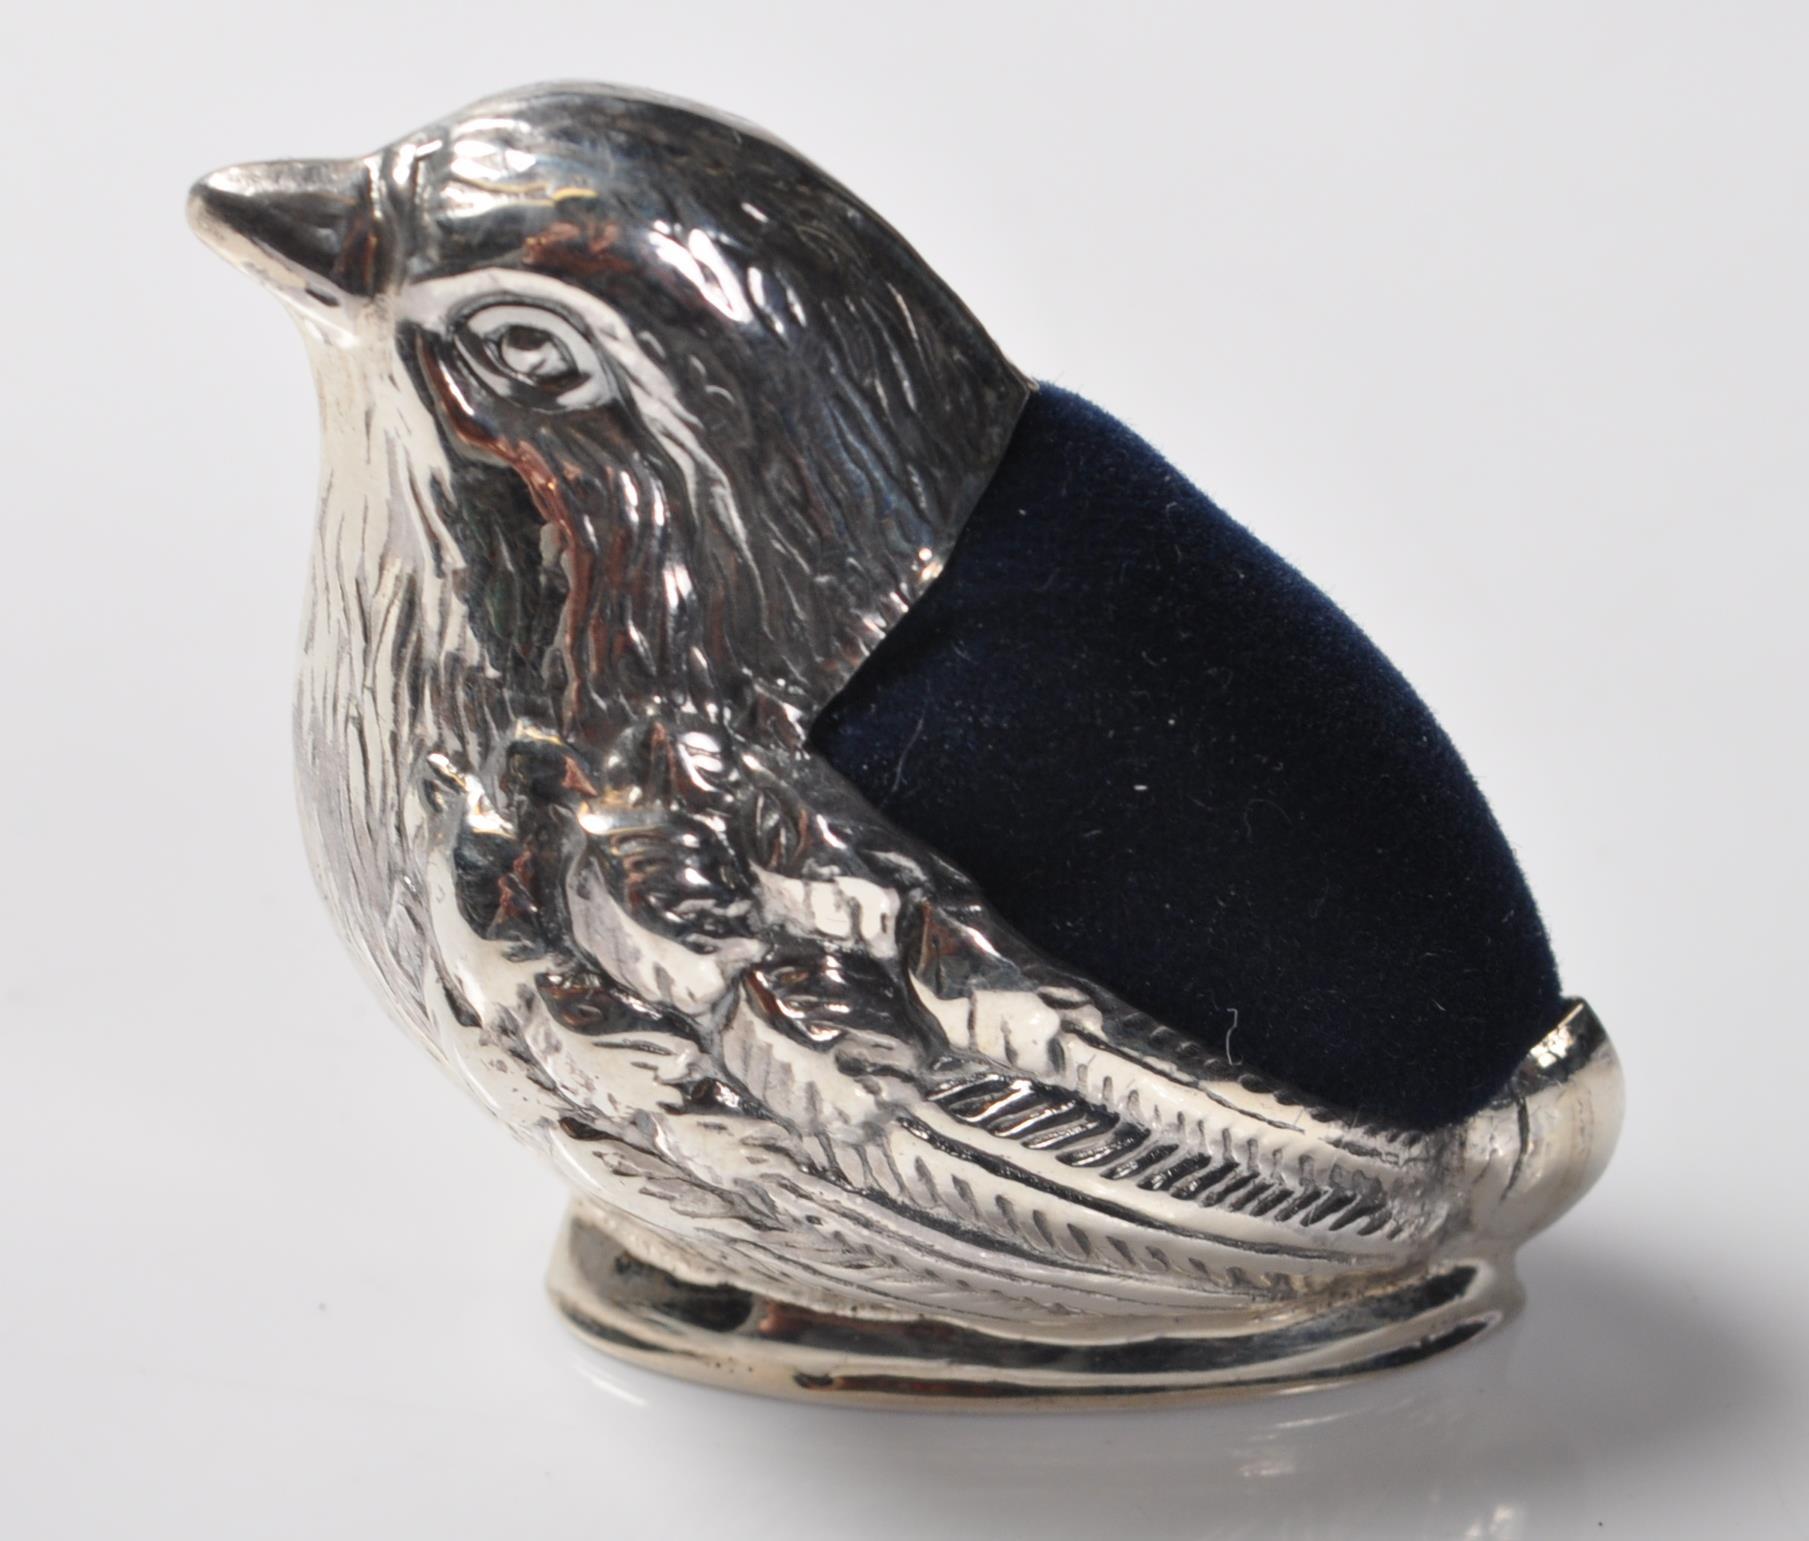 A STAMPED STERLING SILVER PINCUSHION IN THE FORM OF A ROBIN - Image 3 of 5